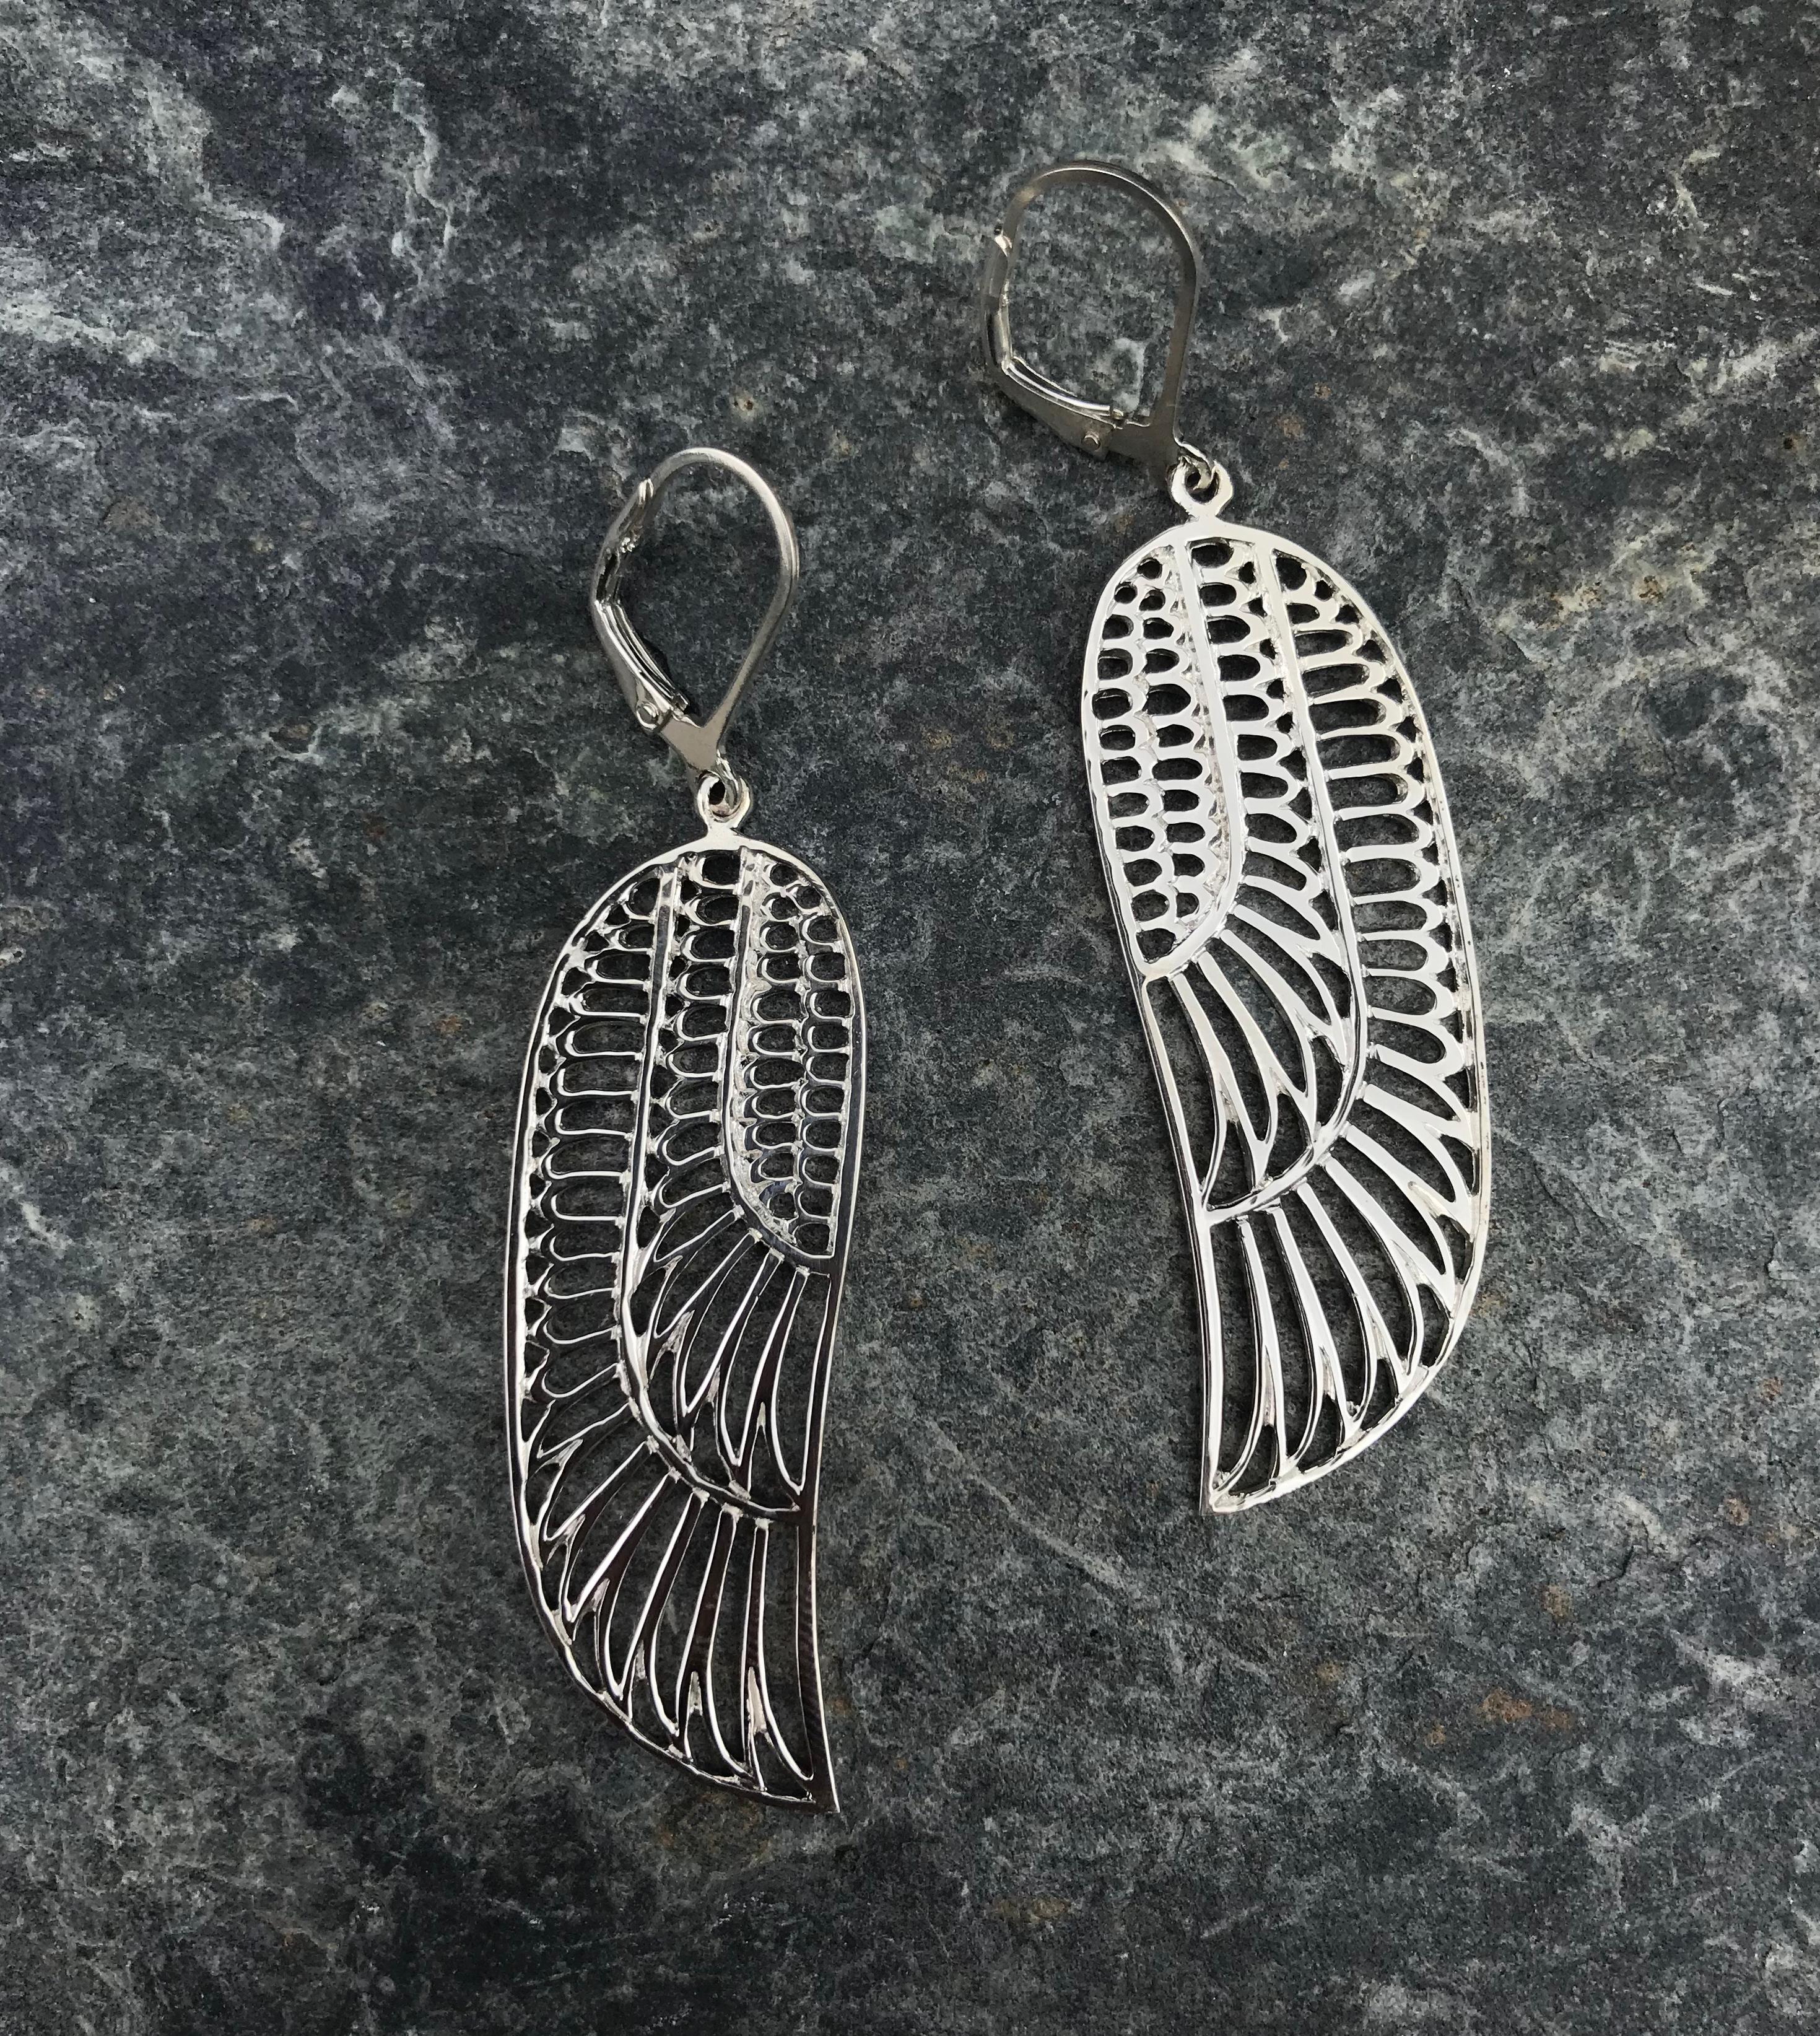 Morgan designed these flattering Wing earrings symbolising strength, power and femininity before we set up Zoe & Morgan.

Thanks to the soft yet structured shape, they remain one of our bestselling pieces to this day.

Handmade from 925 Sterling